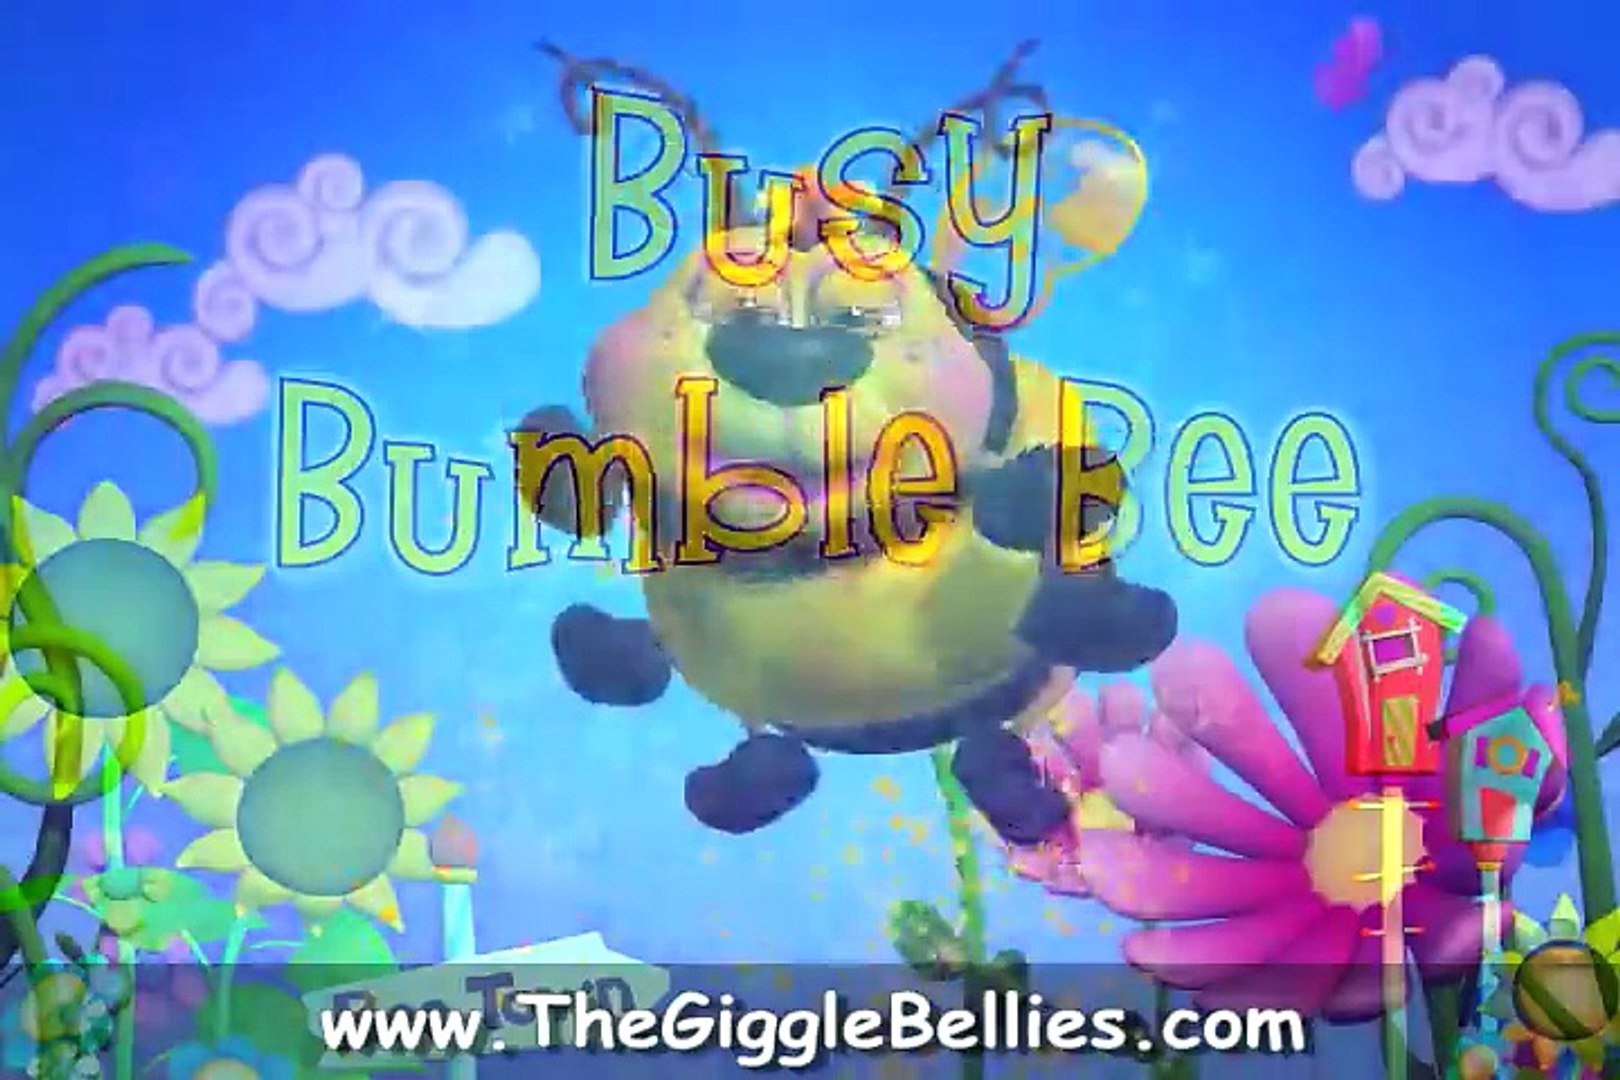 Busy Bumble Bee  Kids Song   Children Learning Songs with The GiggleBellies